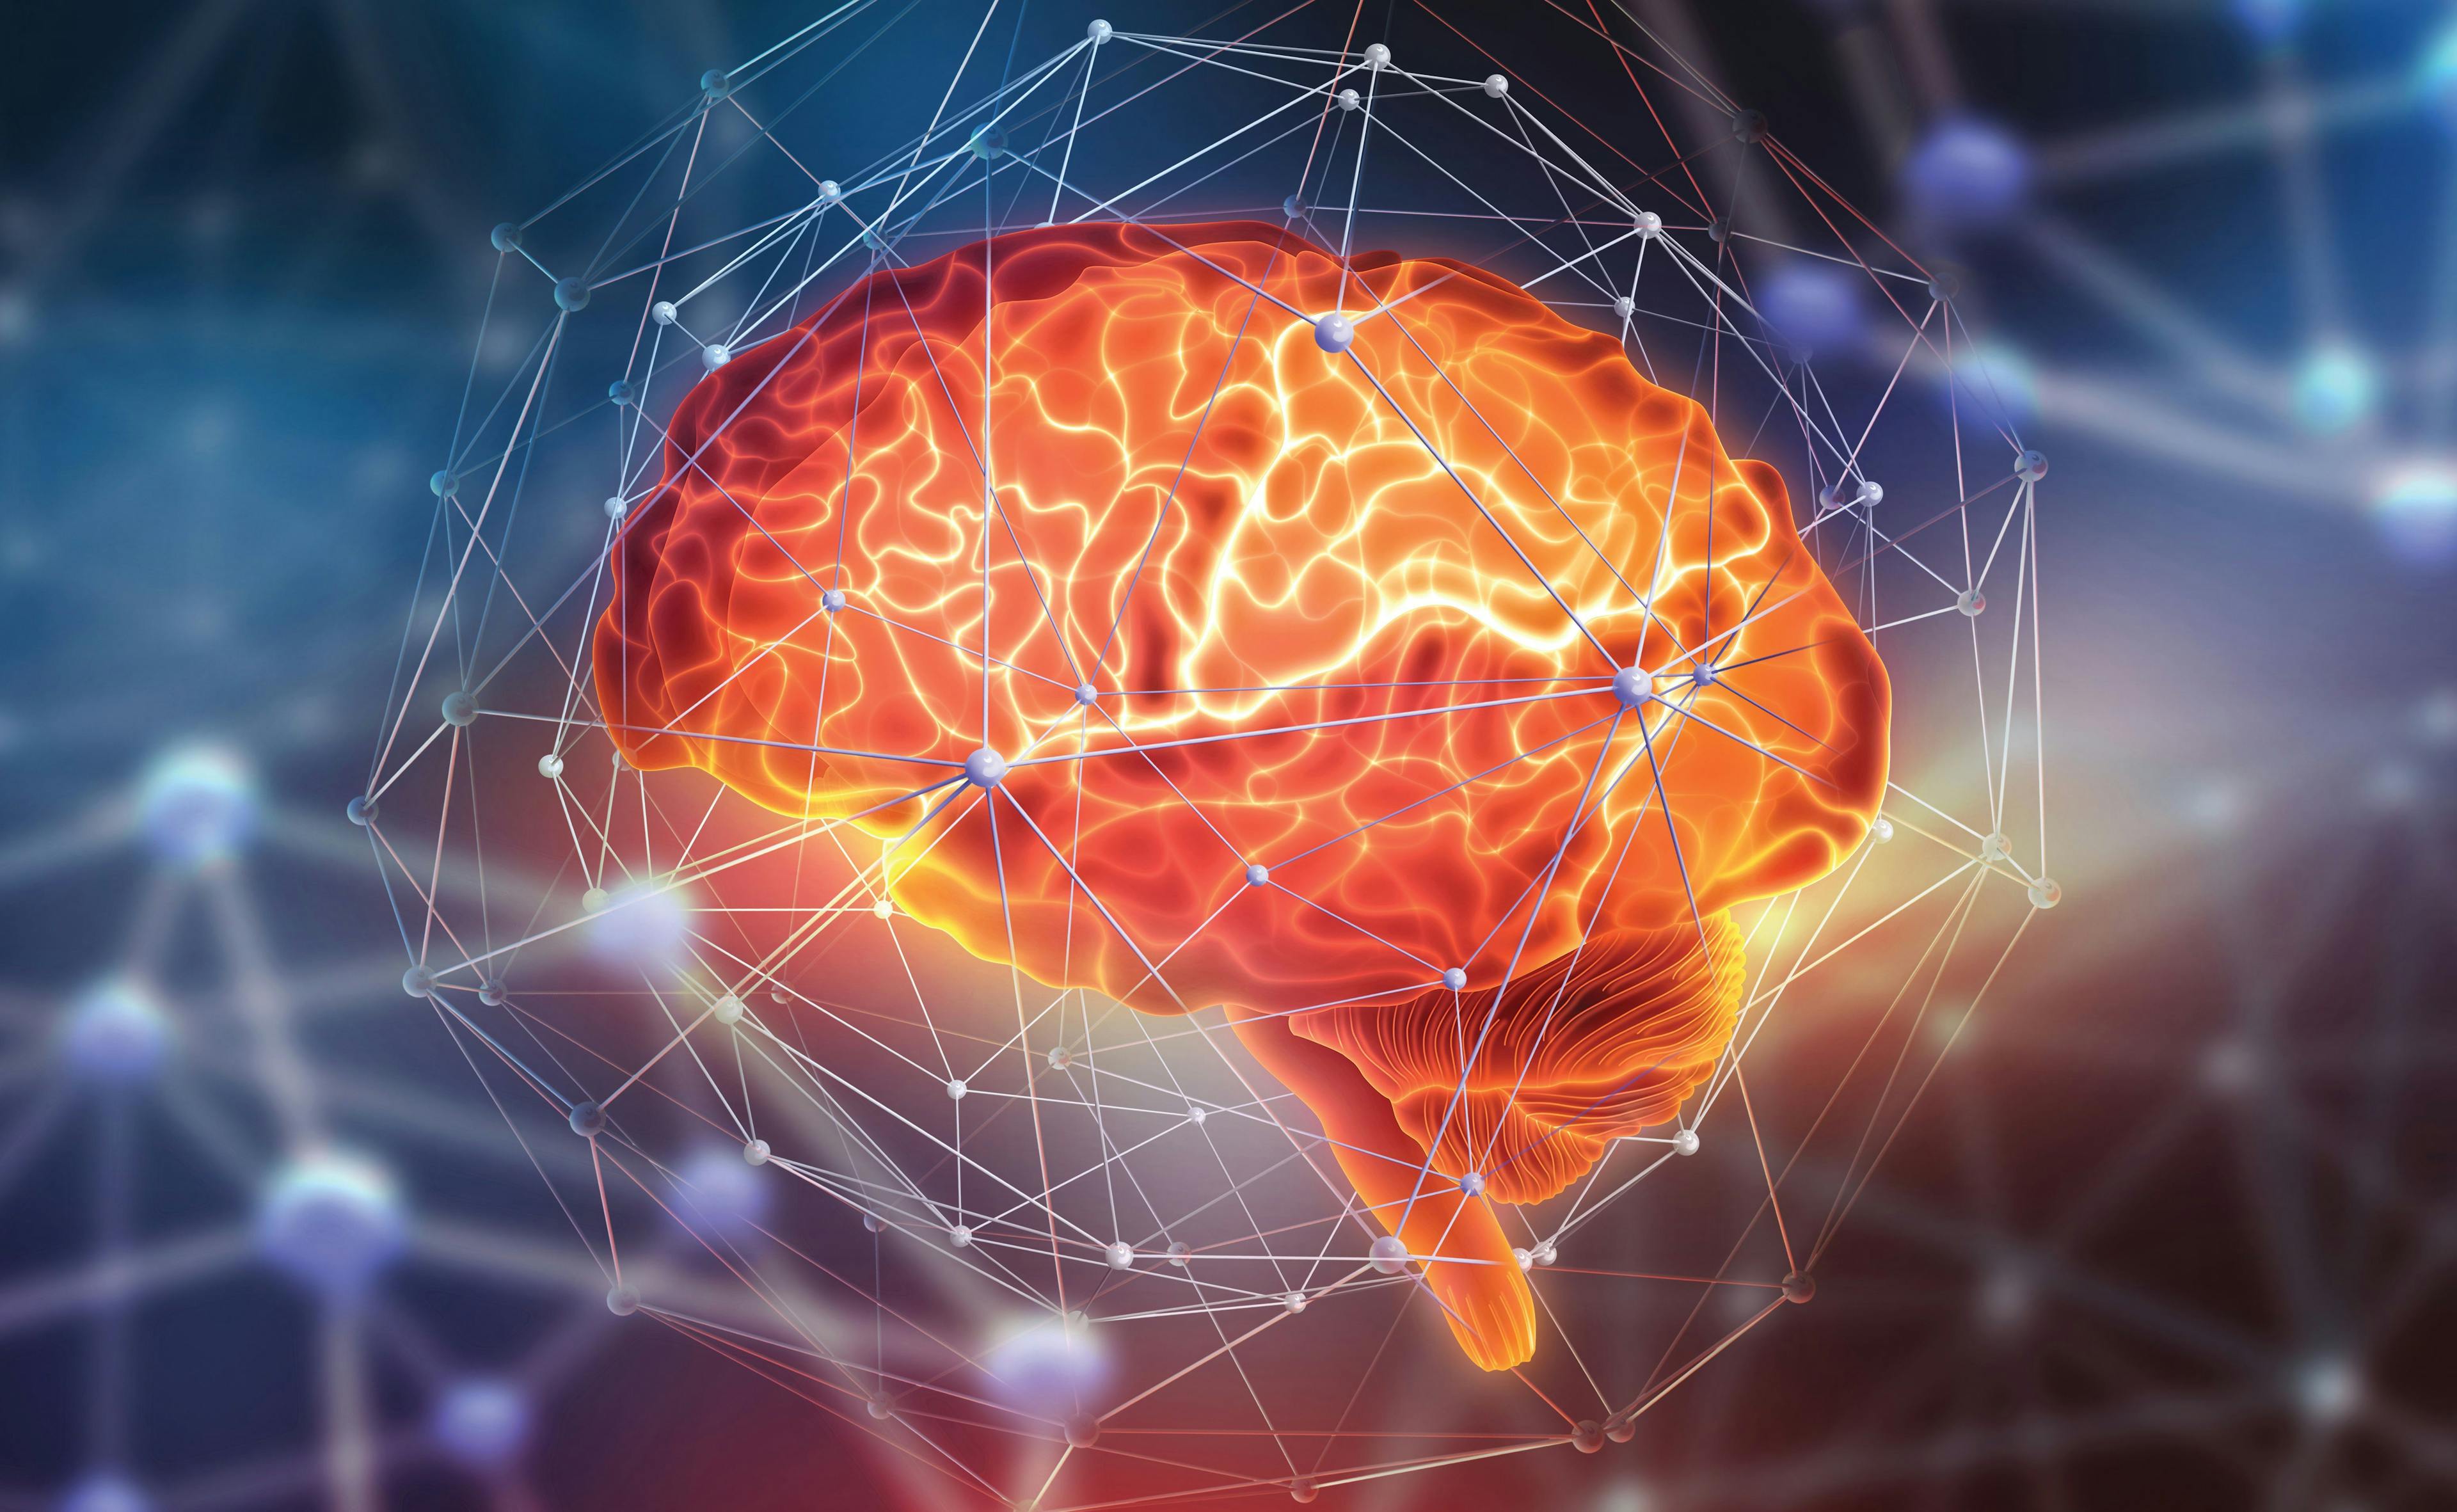 Epilepsy Brain Implant Does Not Change Individuals’ Personalities